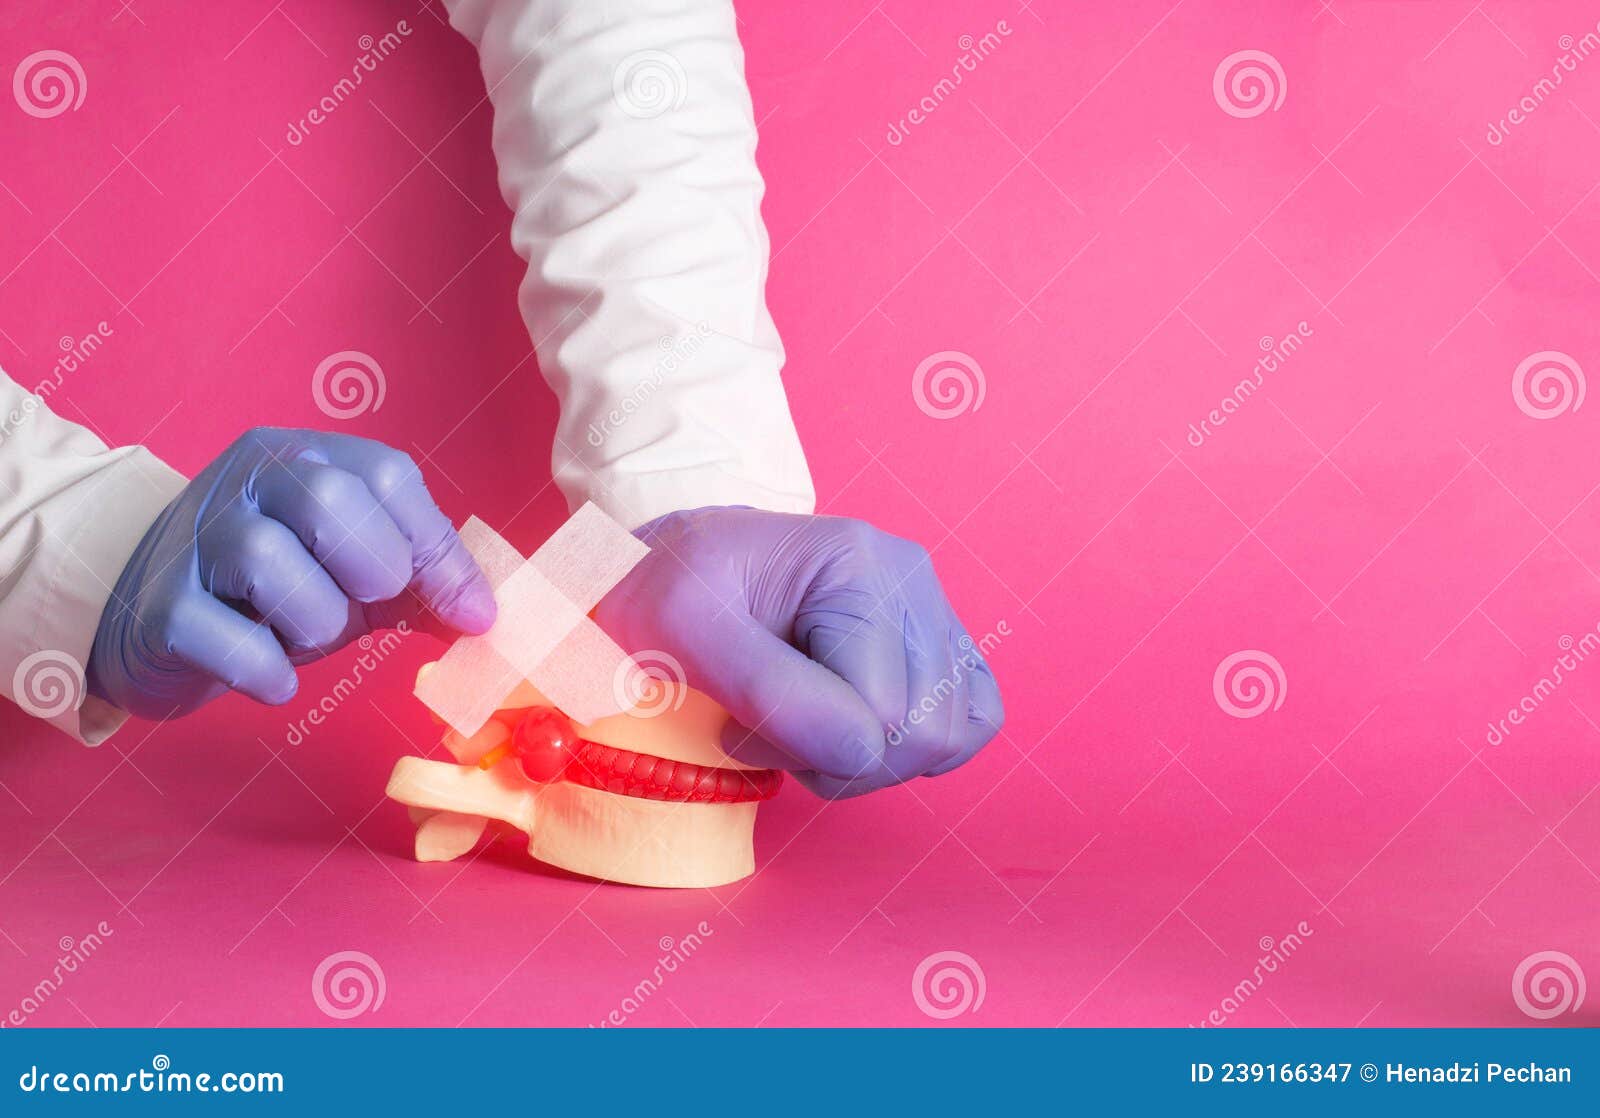 the doctor`s hands are gluing a medical plaster on the released nucleus pulposus, intervertebral hernia, pink background.